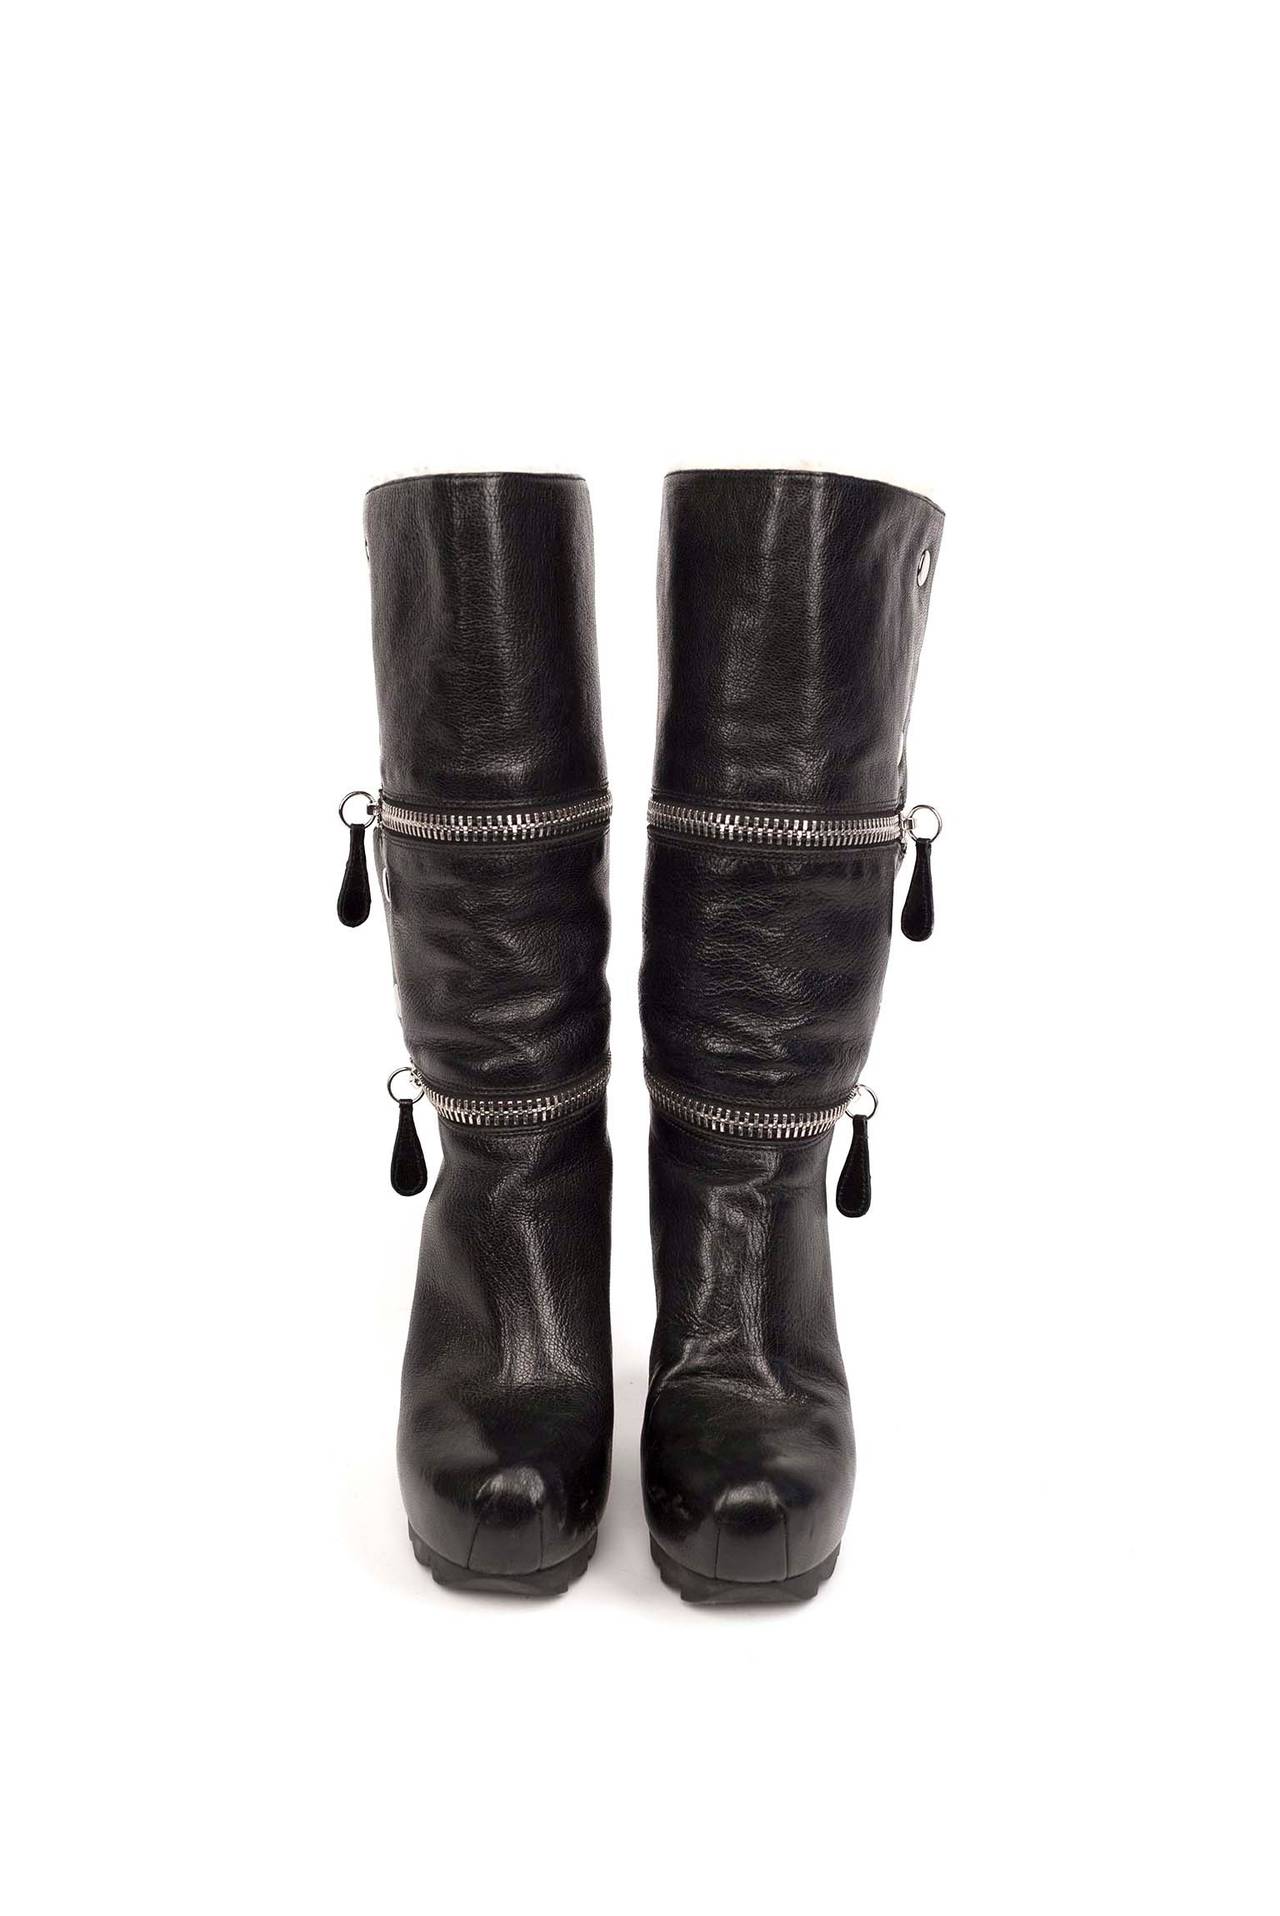 Camilla Skovgaard zippered platform wedge.
 Pebbled leather ankle-high wedge boots in black. rounded toe. Silver tone double exposed zip enclosure. Silver tone press studs at side. Signature tags at zips. Wool lining. Rubber sole. Approx. 4.75